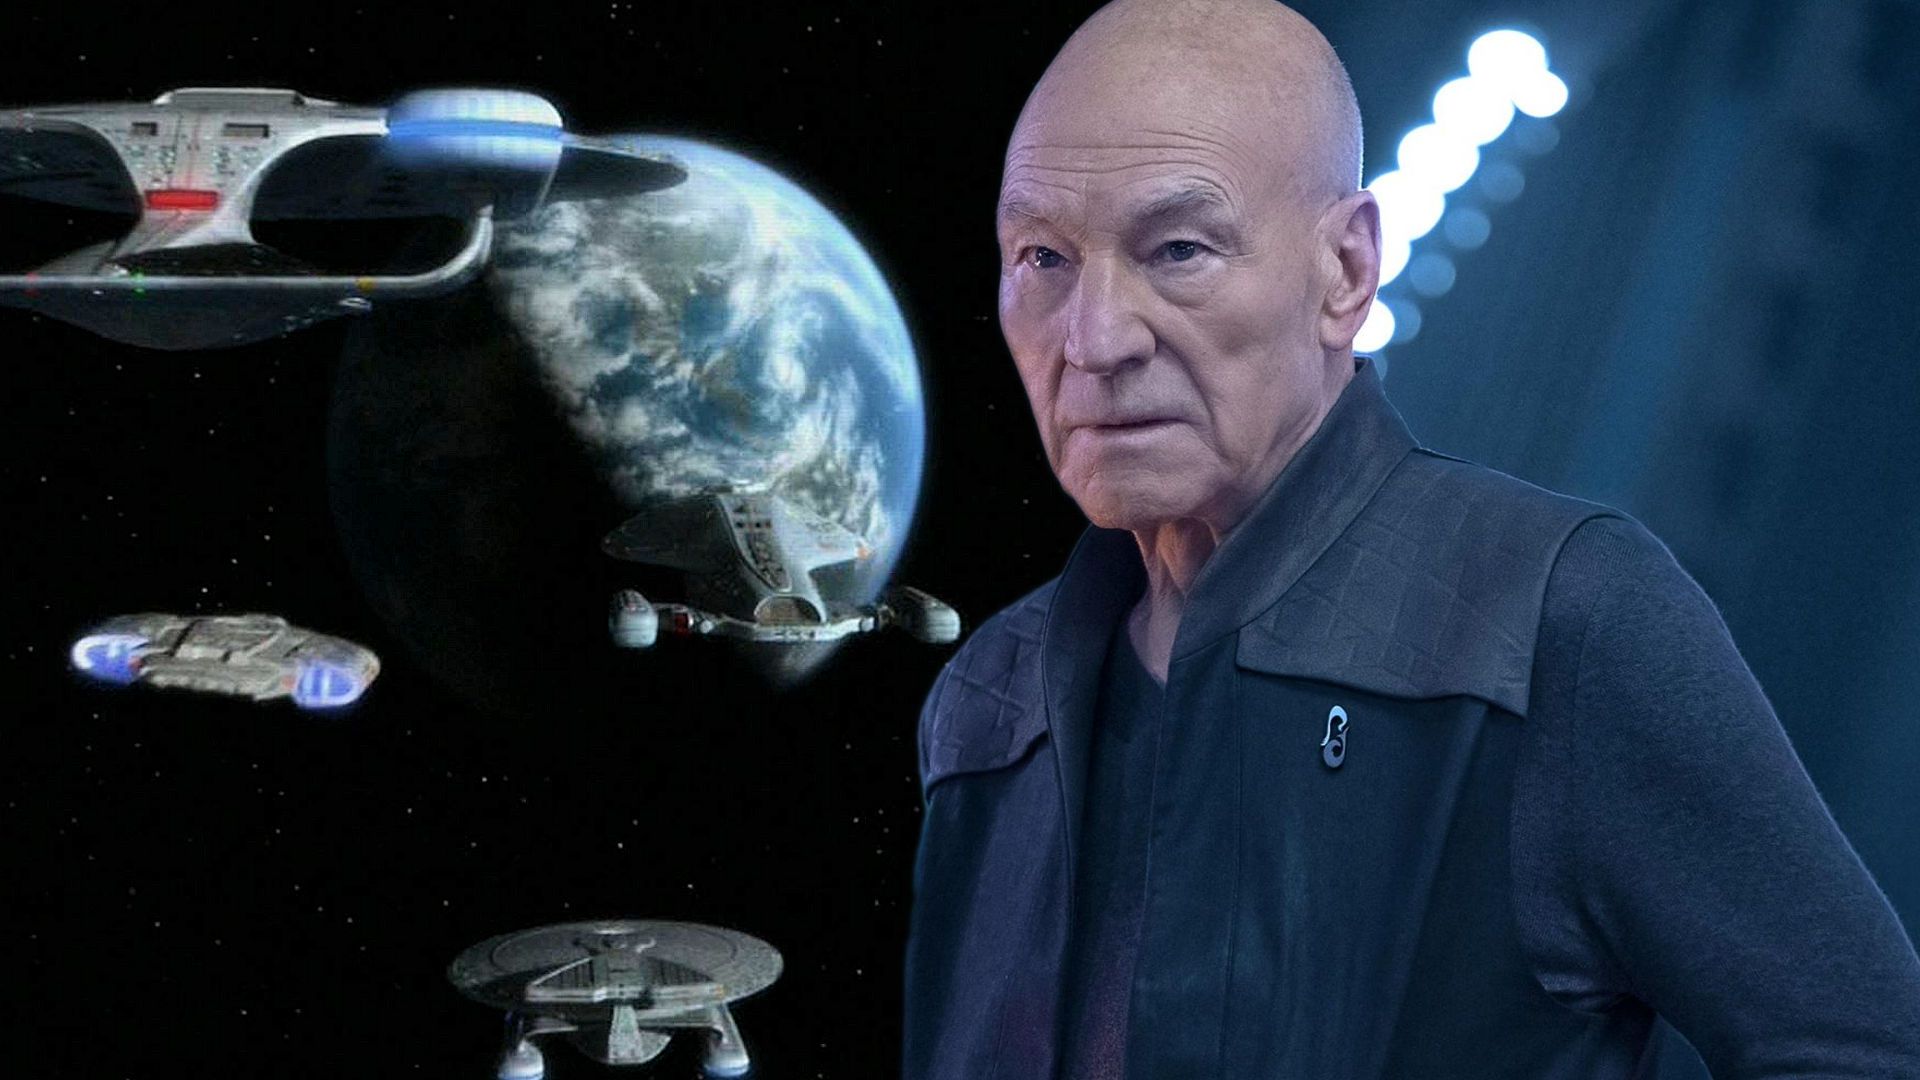 Star Trek Picard and Voyager Video Image